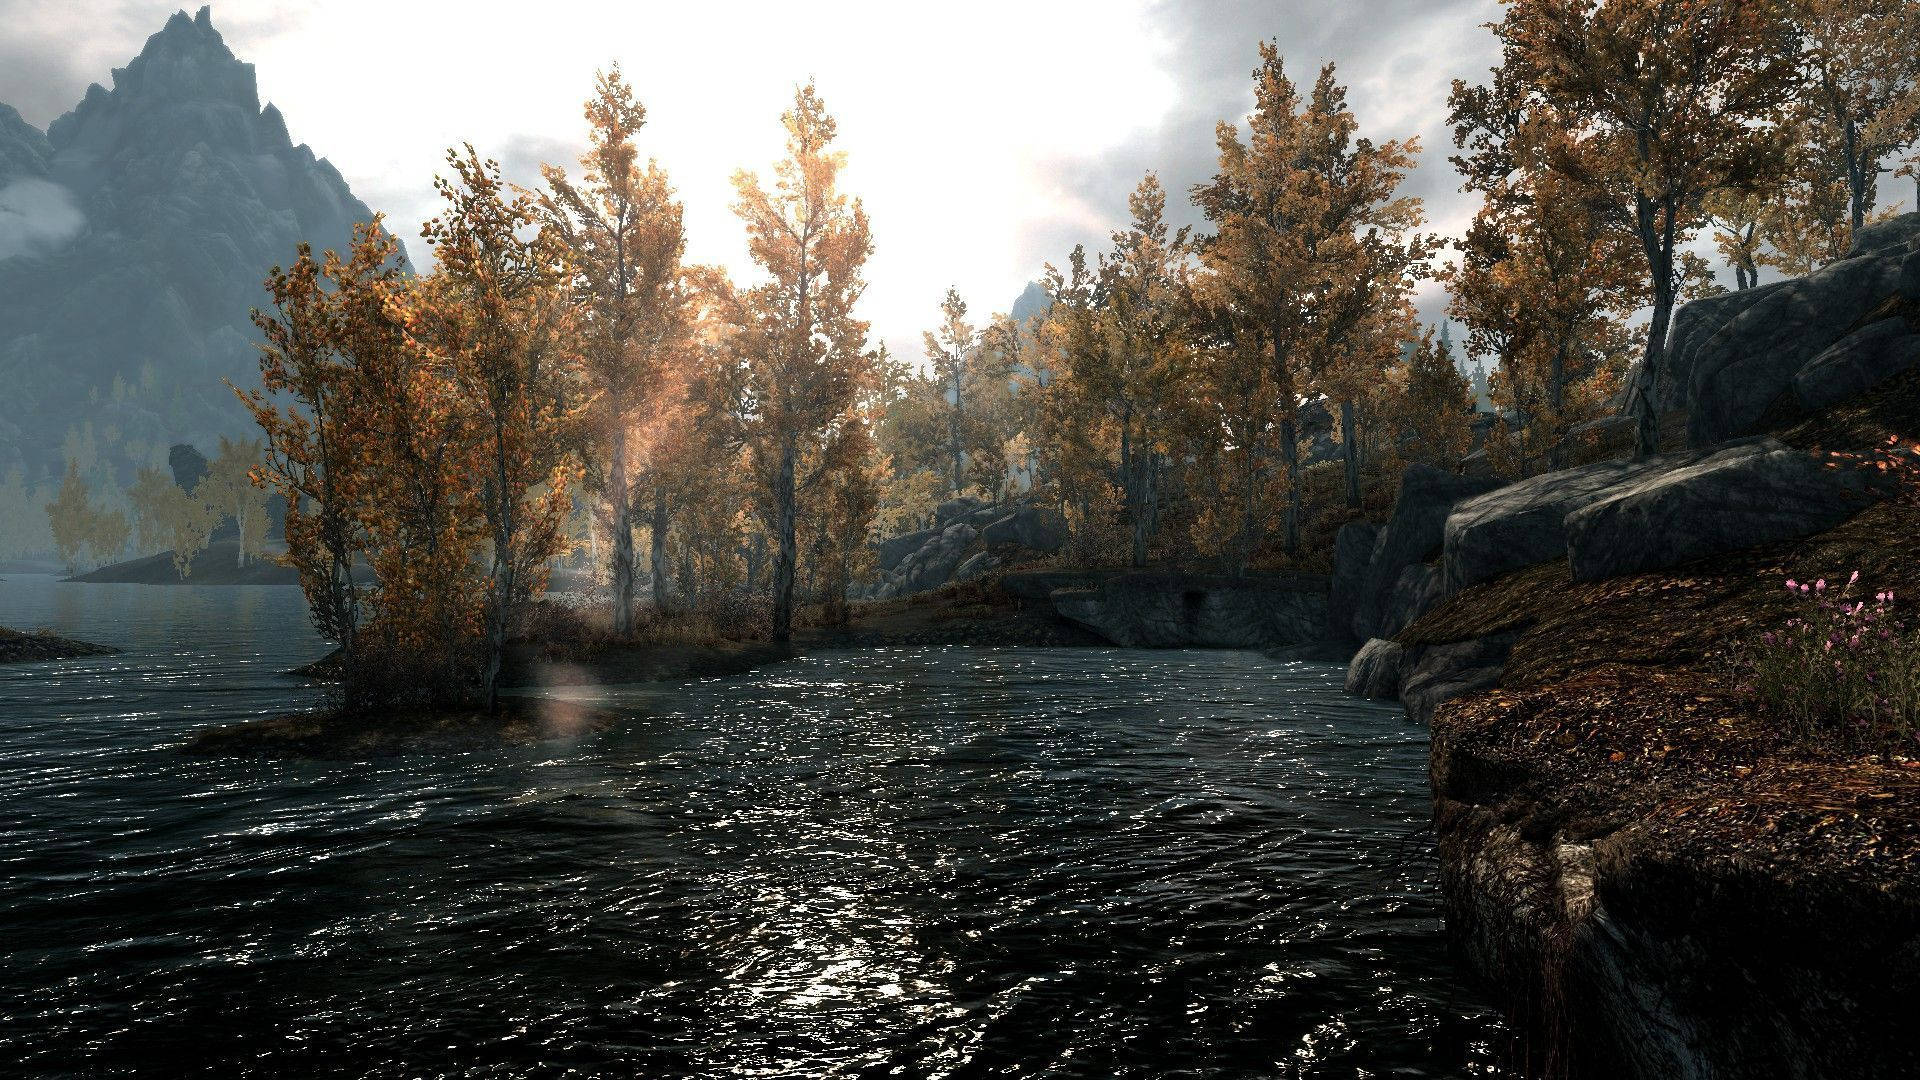 Explore the ancient lands of Skyrim in stunning Ultra HD Wallpaper